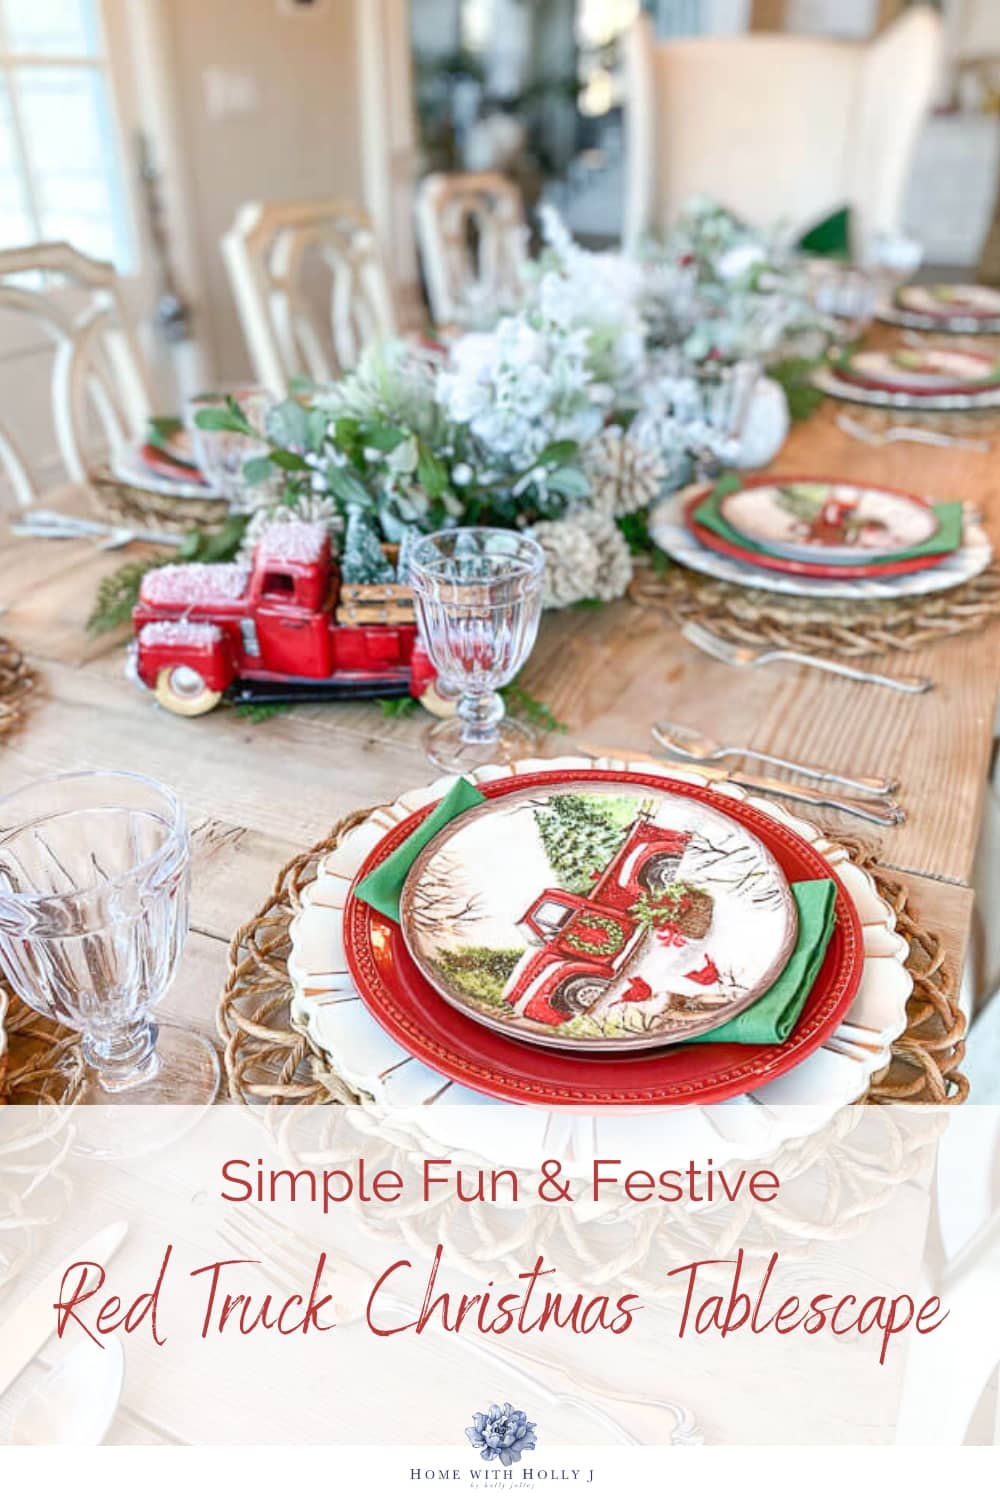 If you're looking for a fun take on a traditional red and green tablescape, my red truck Christmas tablescape will be just what you need. Check it out in today's post.